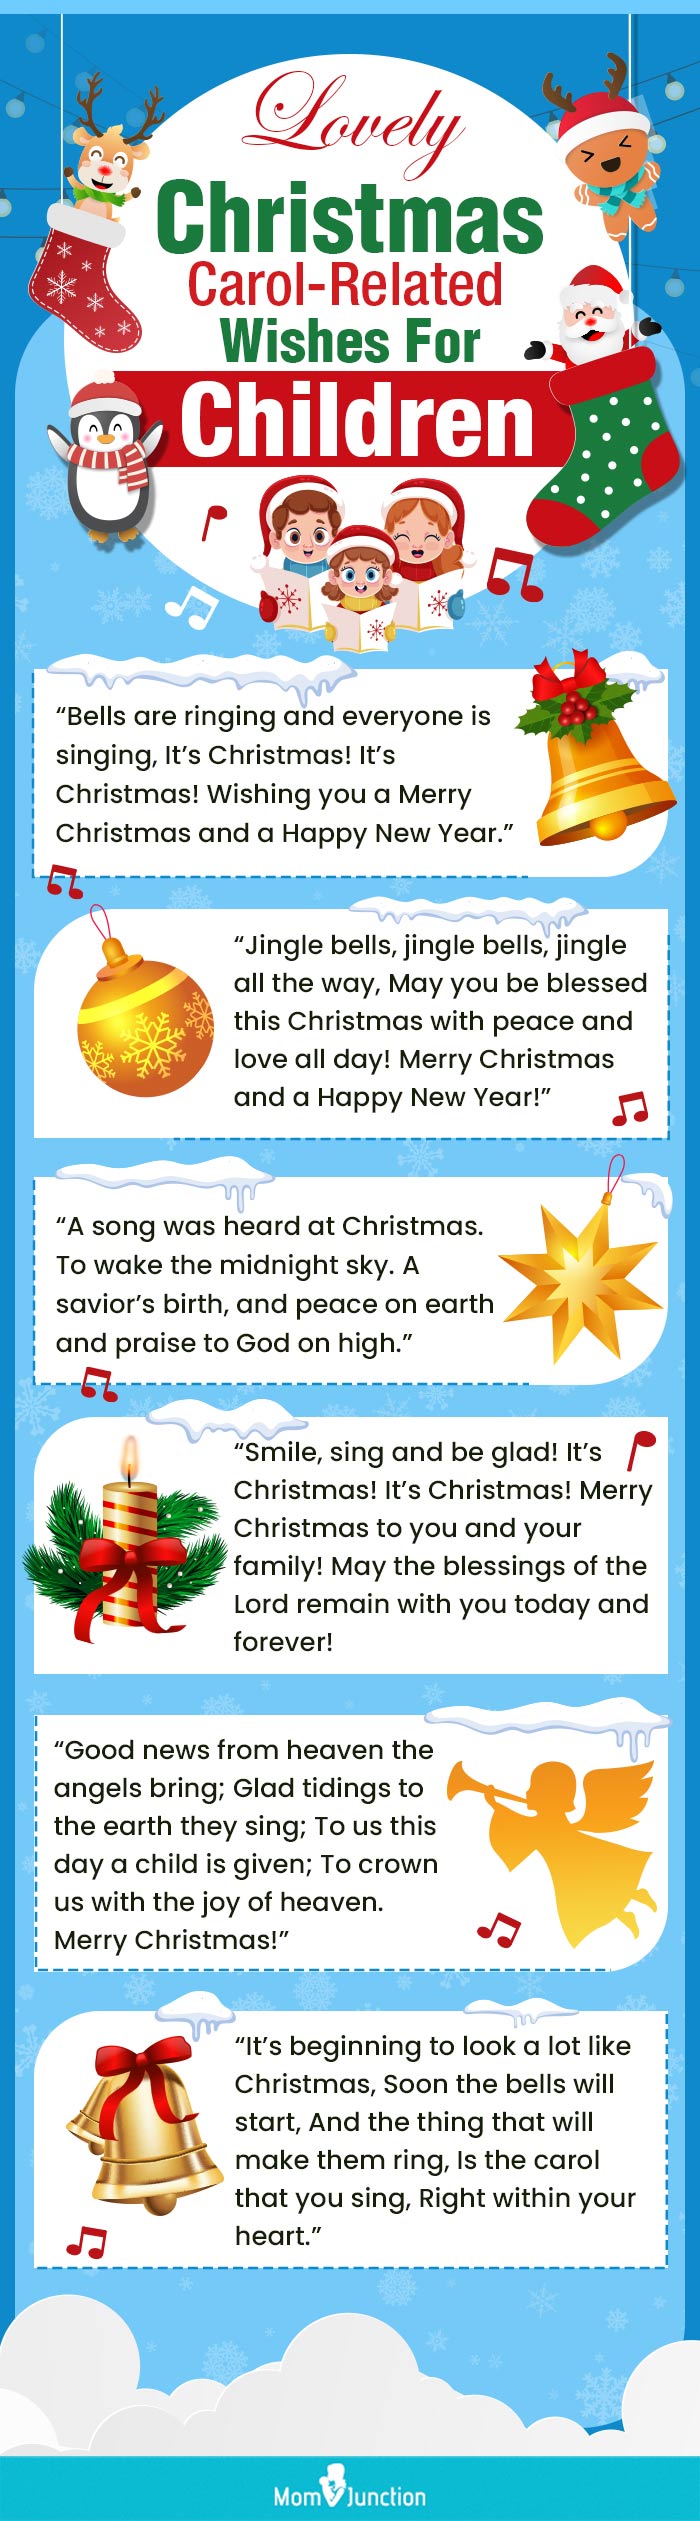 lovely christmas carol related wishes for children (infographic)